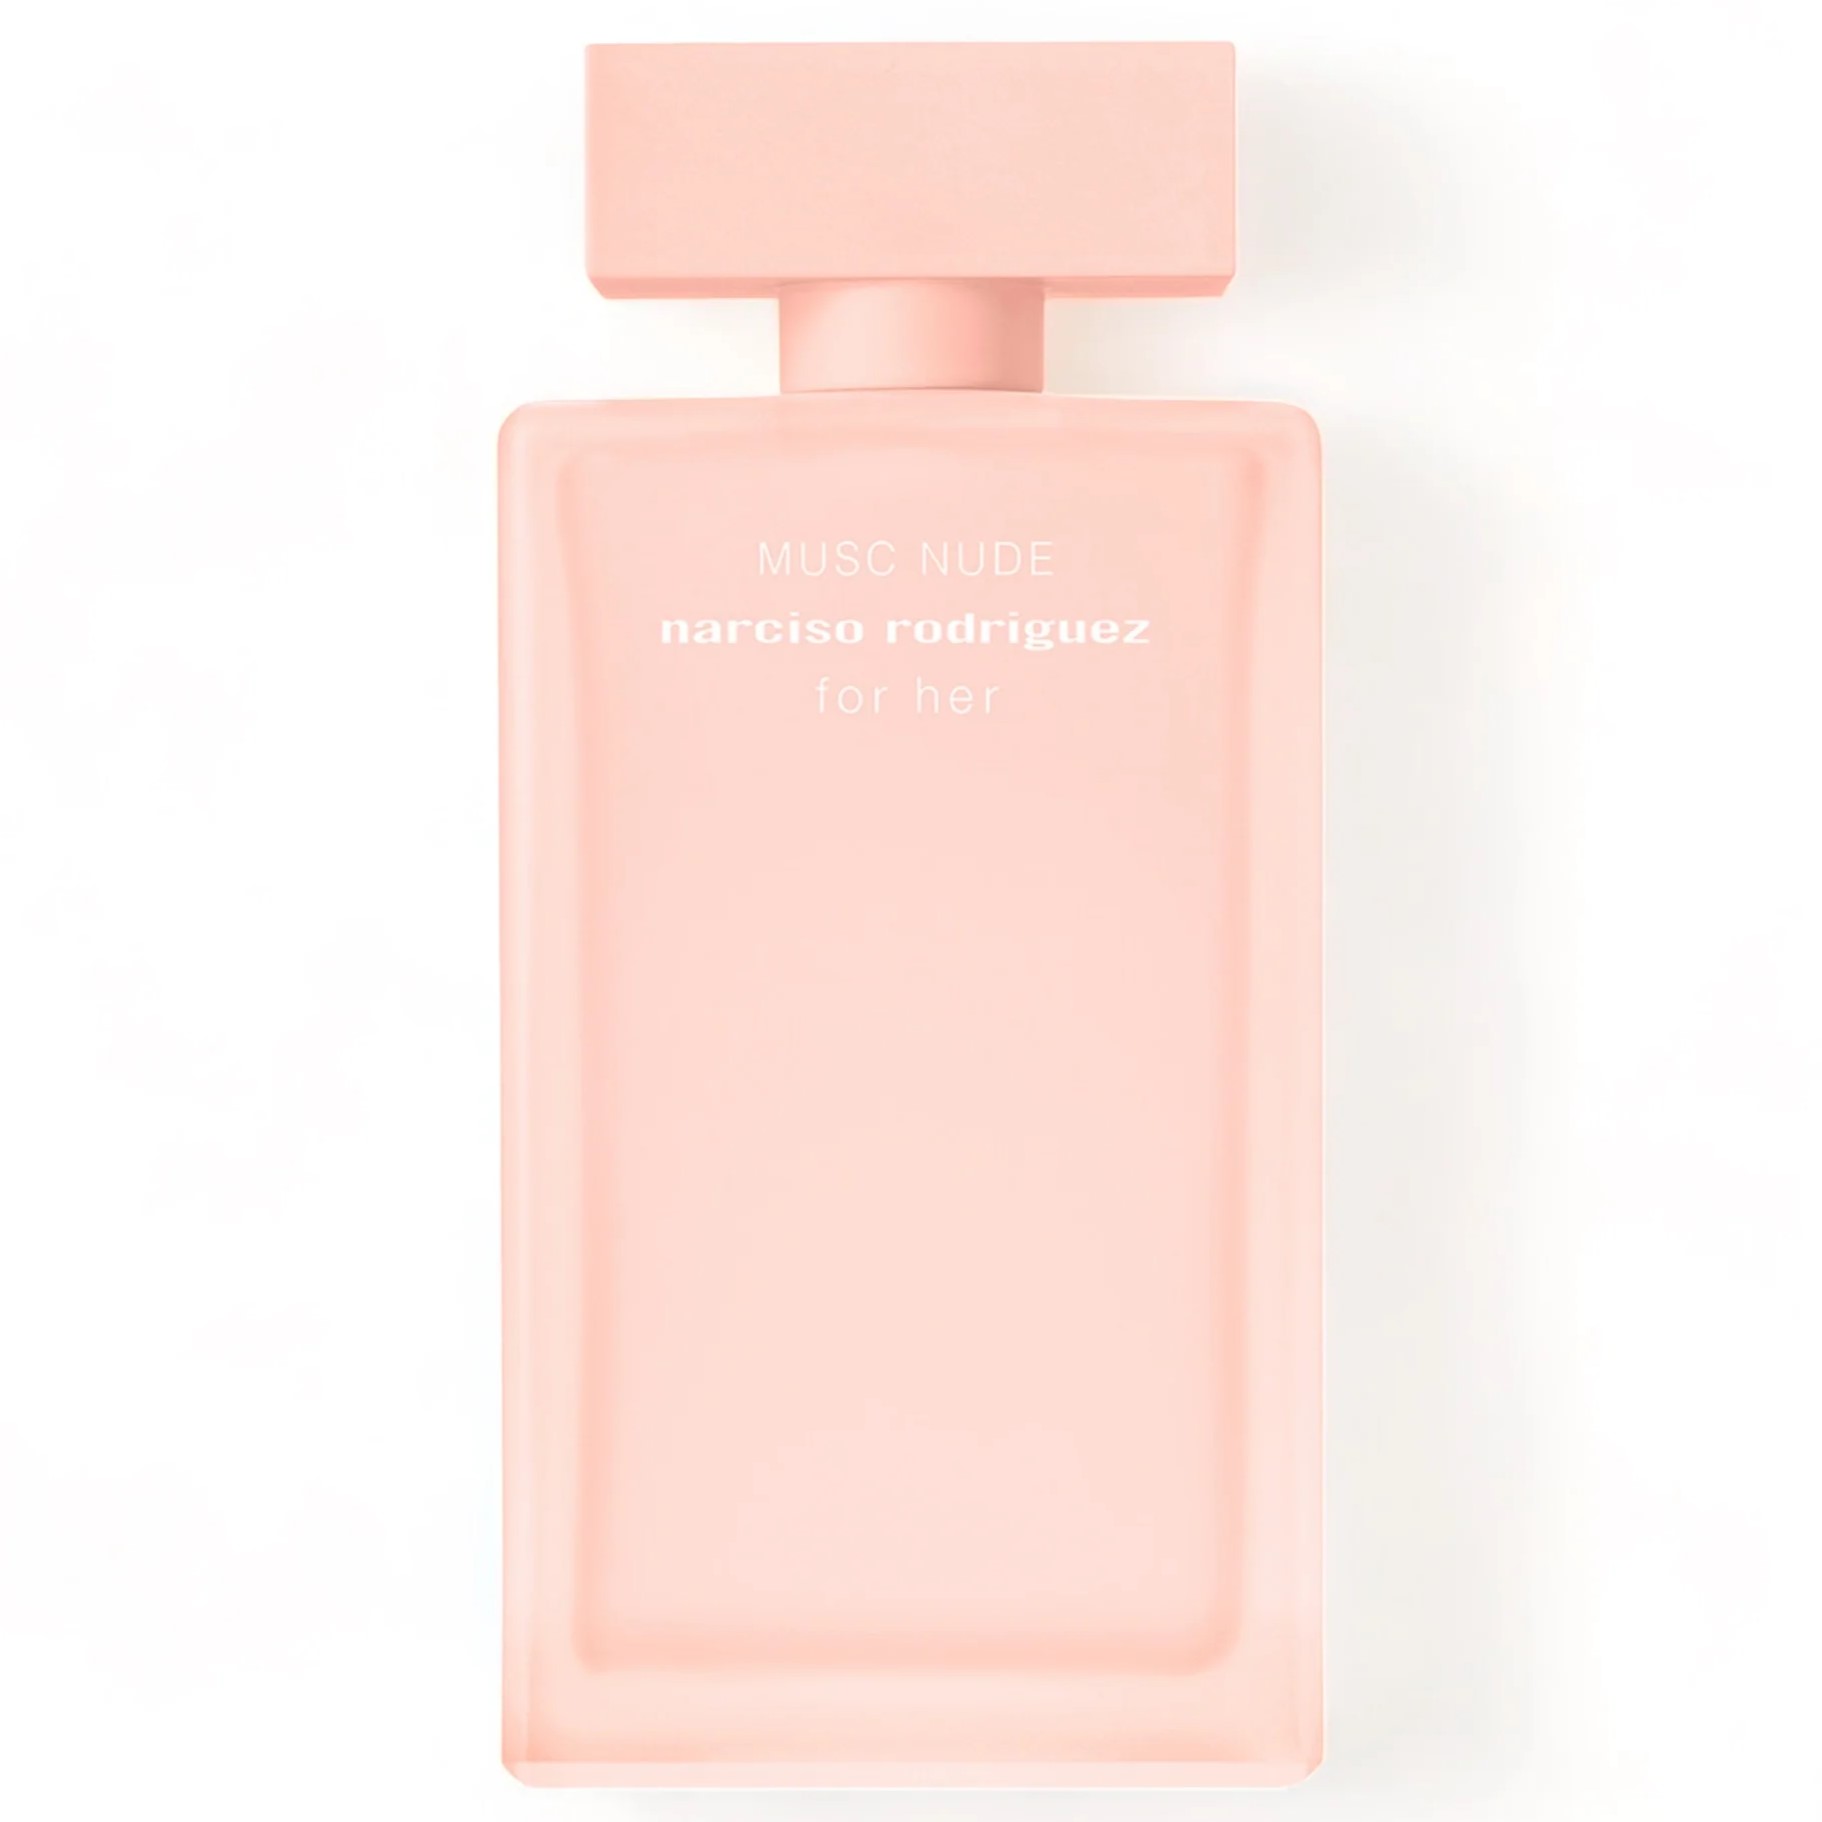 NƯỚC HOA NỮ NARCISO RODRIGUEZ MUSC NUDE FOR HER EDP 1